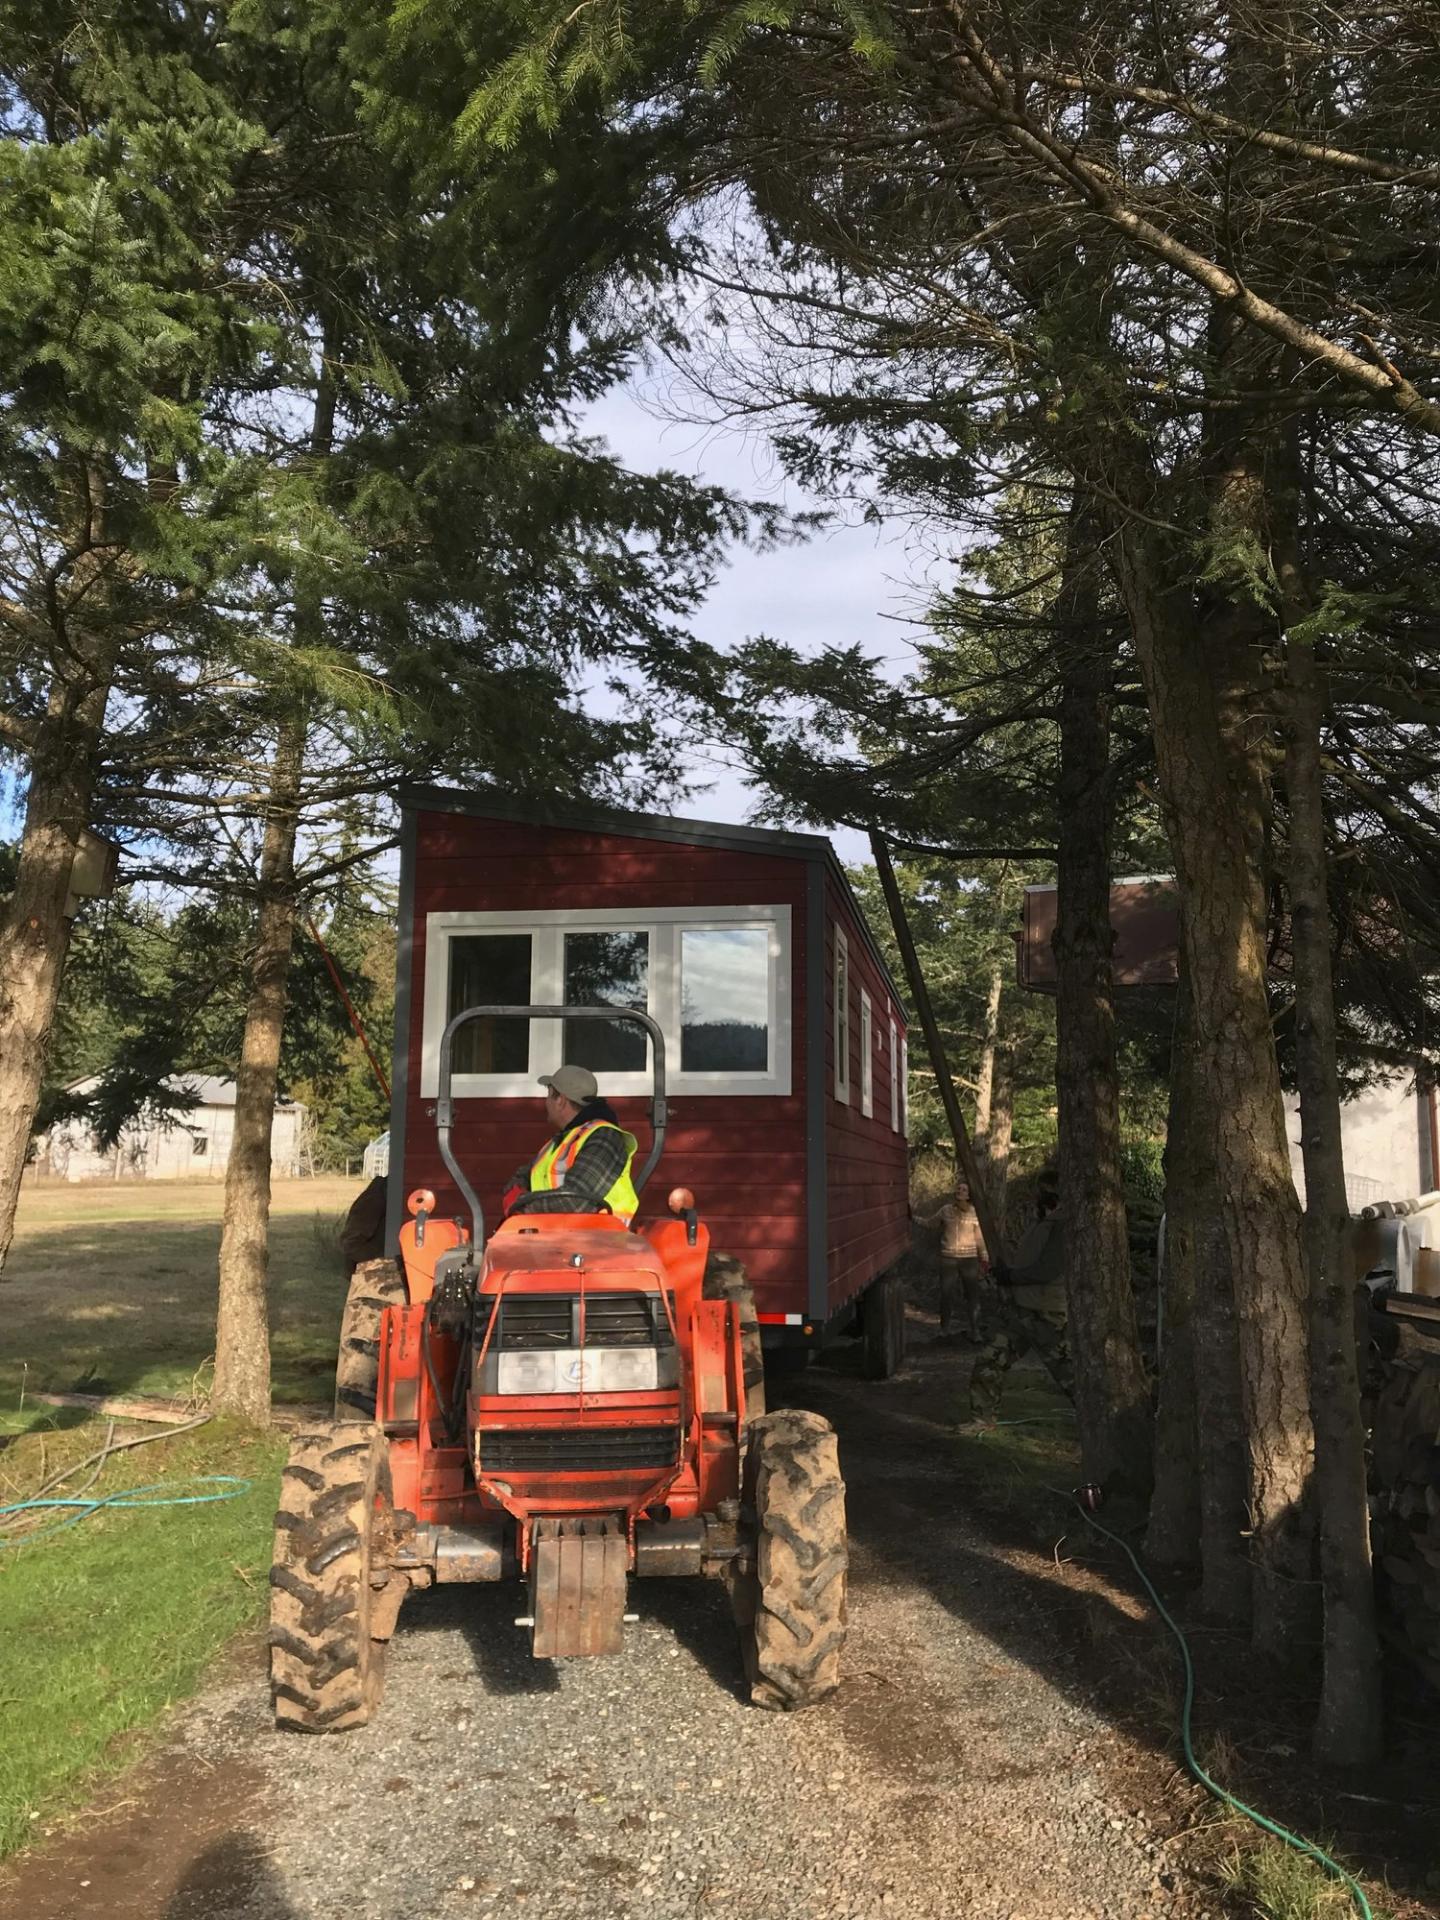 Tiny House Being Towed by Tractor - Big Red by Rewild Homes